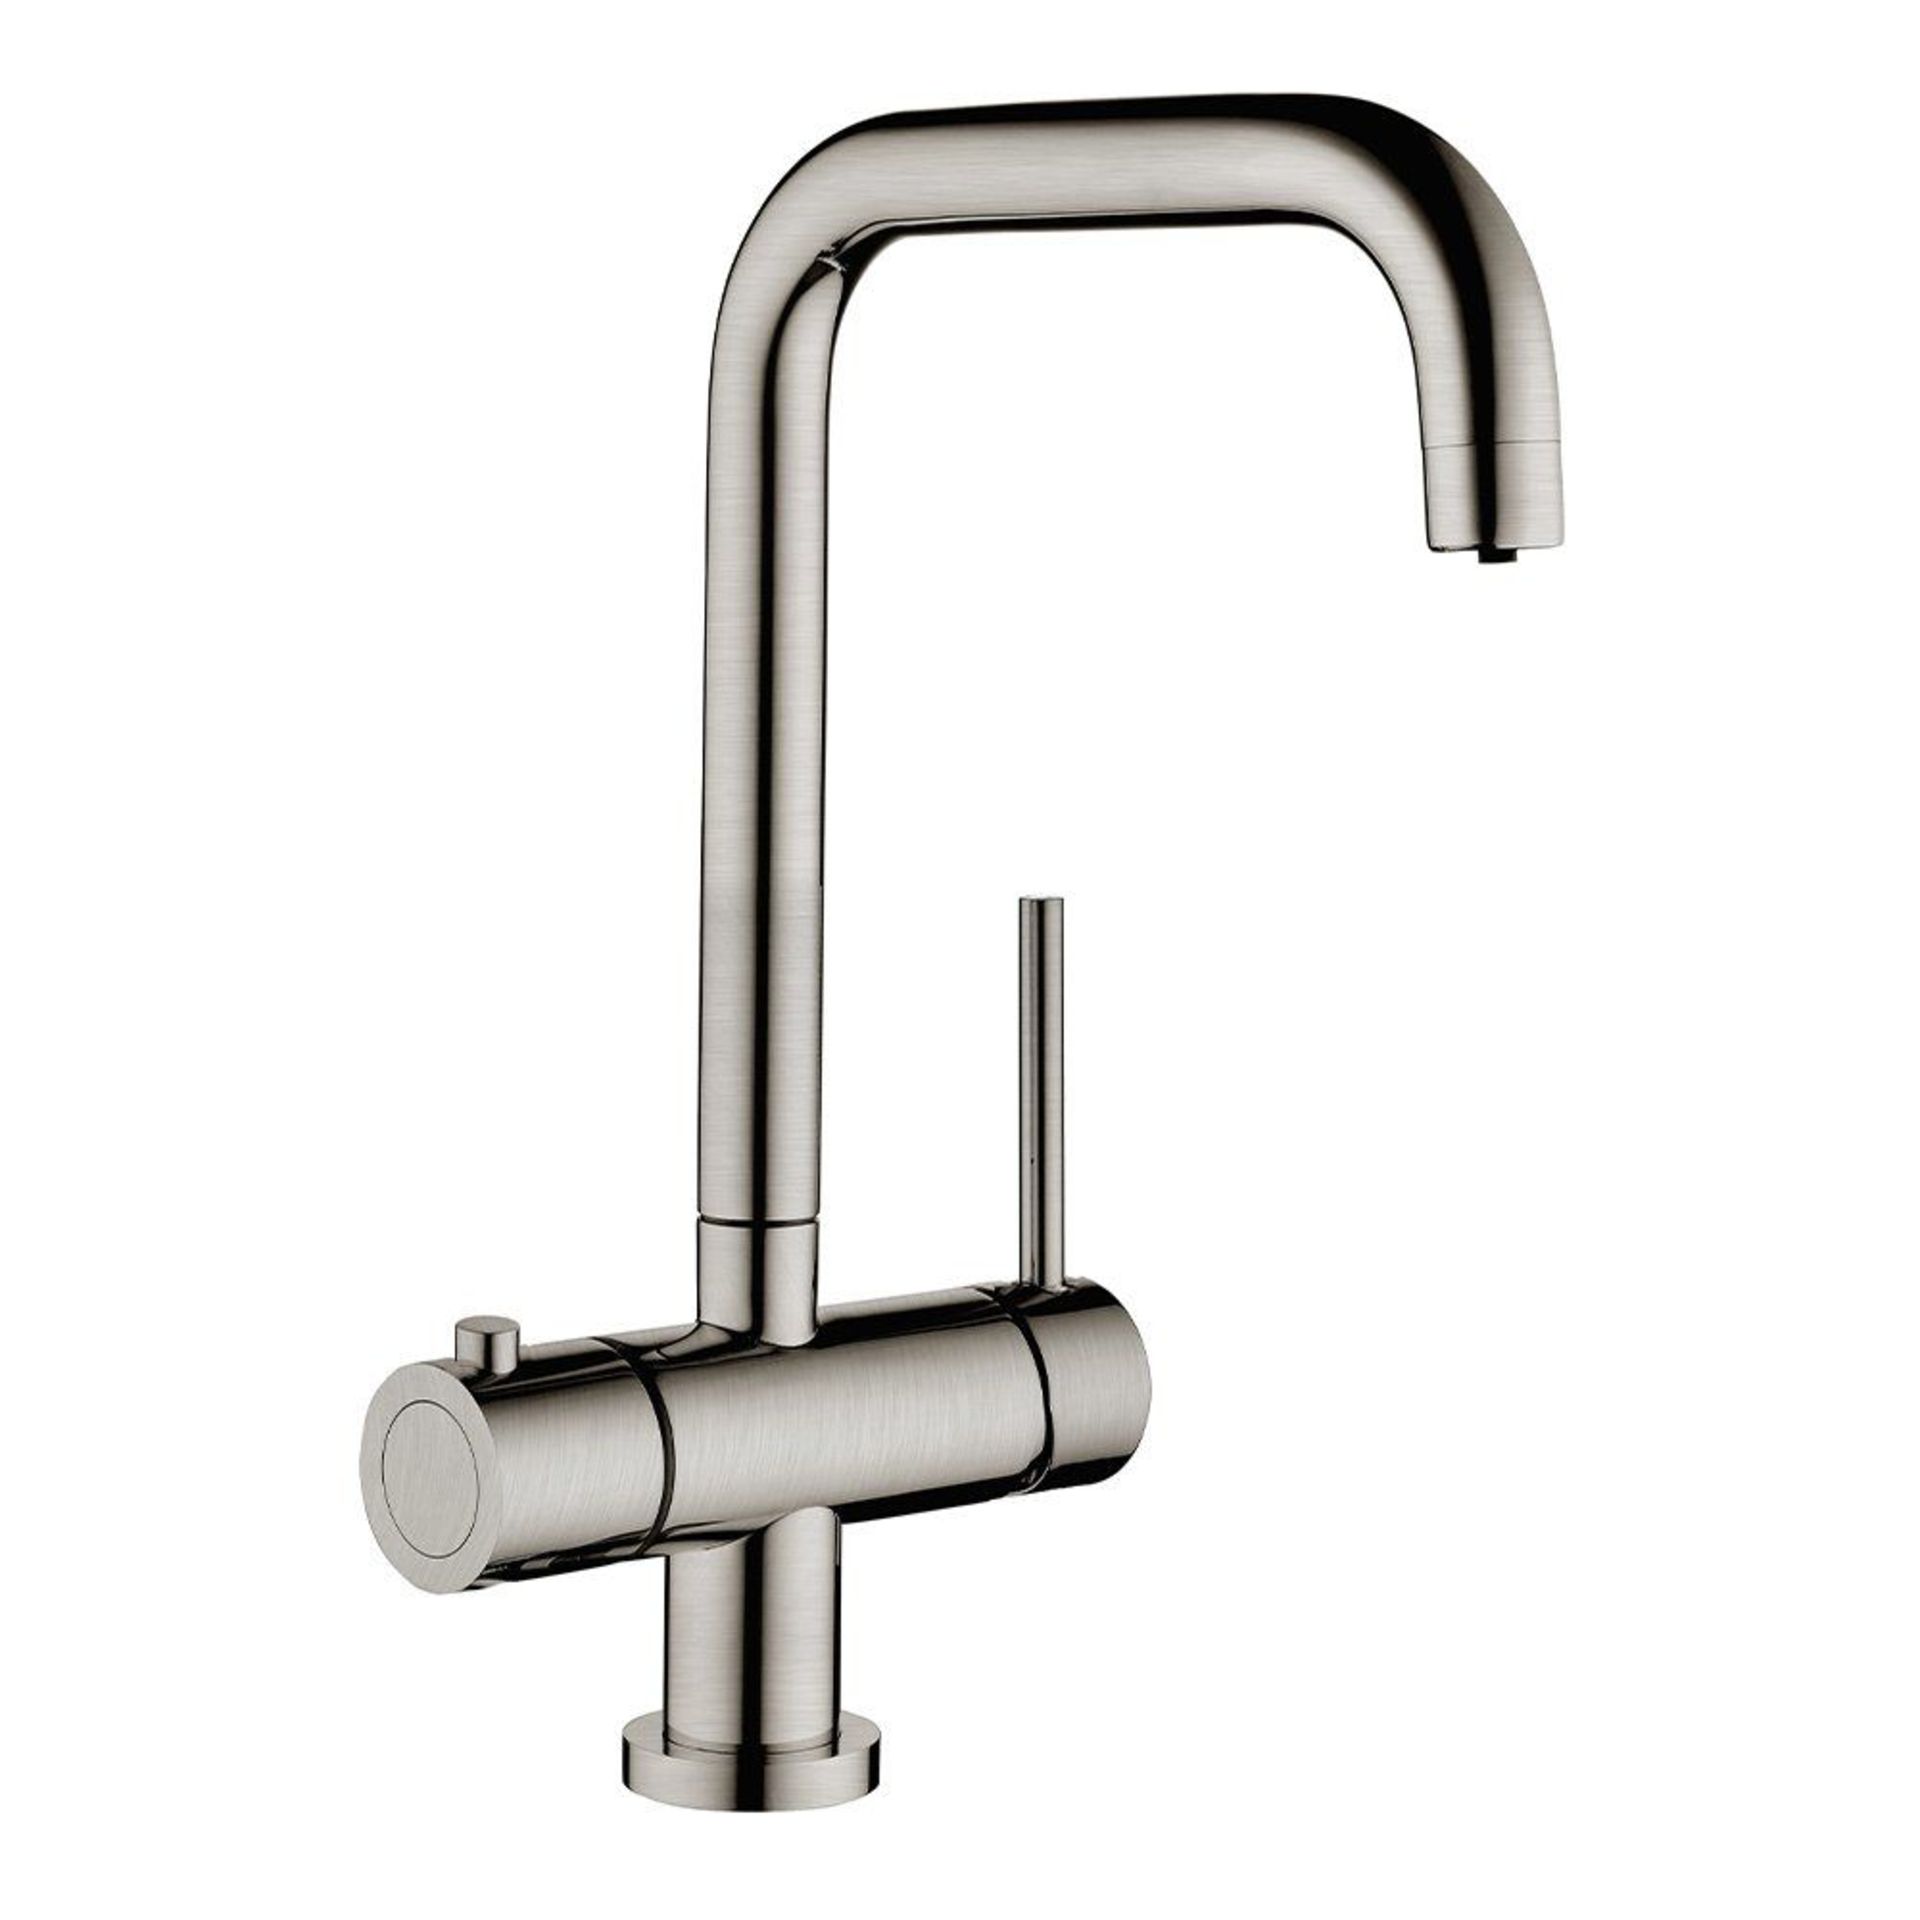 New Prima+ BPR403 3 In 1 Hot Tap – Brushed Steel. Rrp £480.00. Overall Height (mm): 347 Spout Height - Image 2 of 2